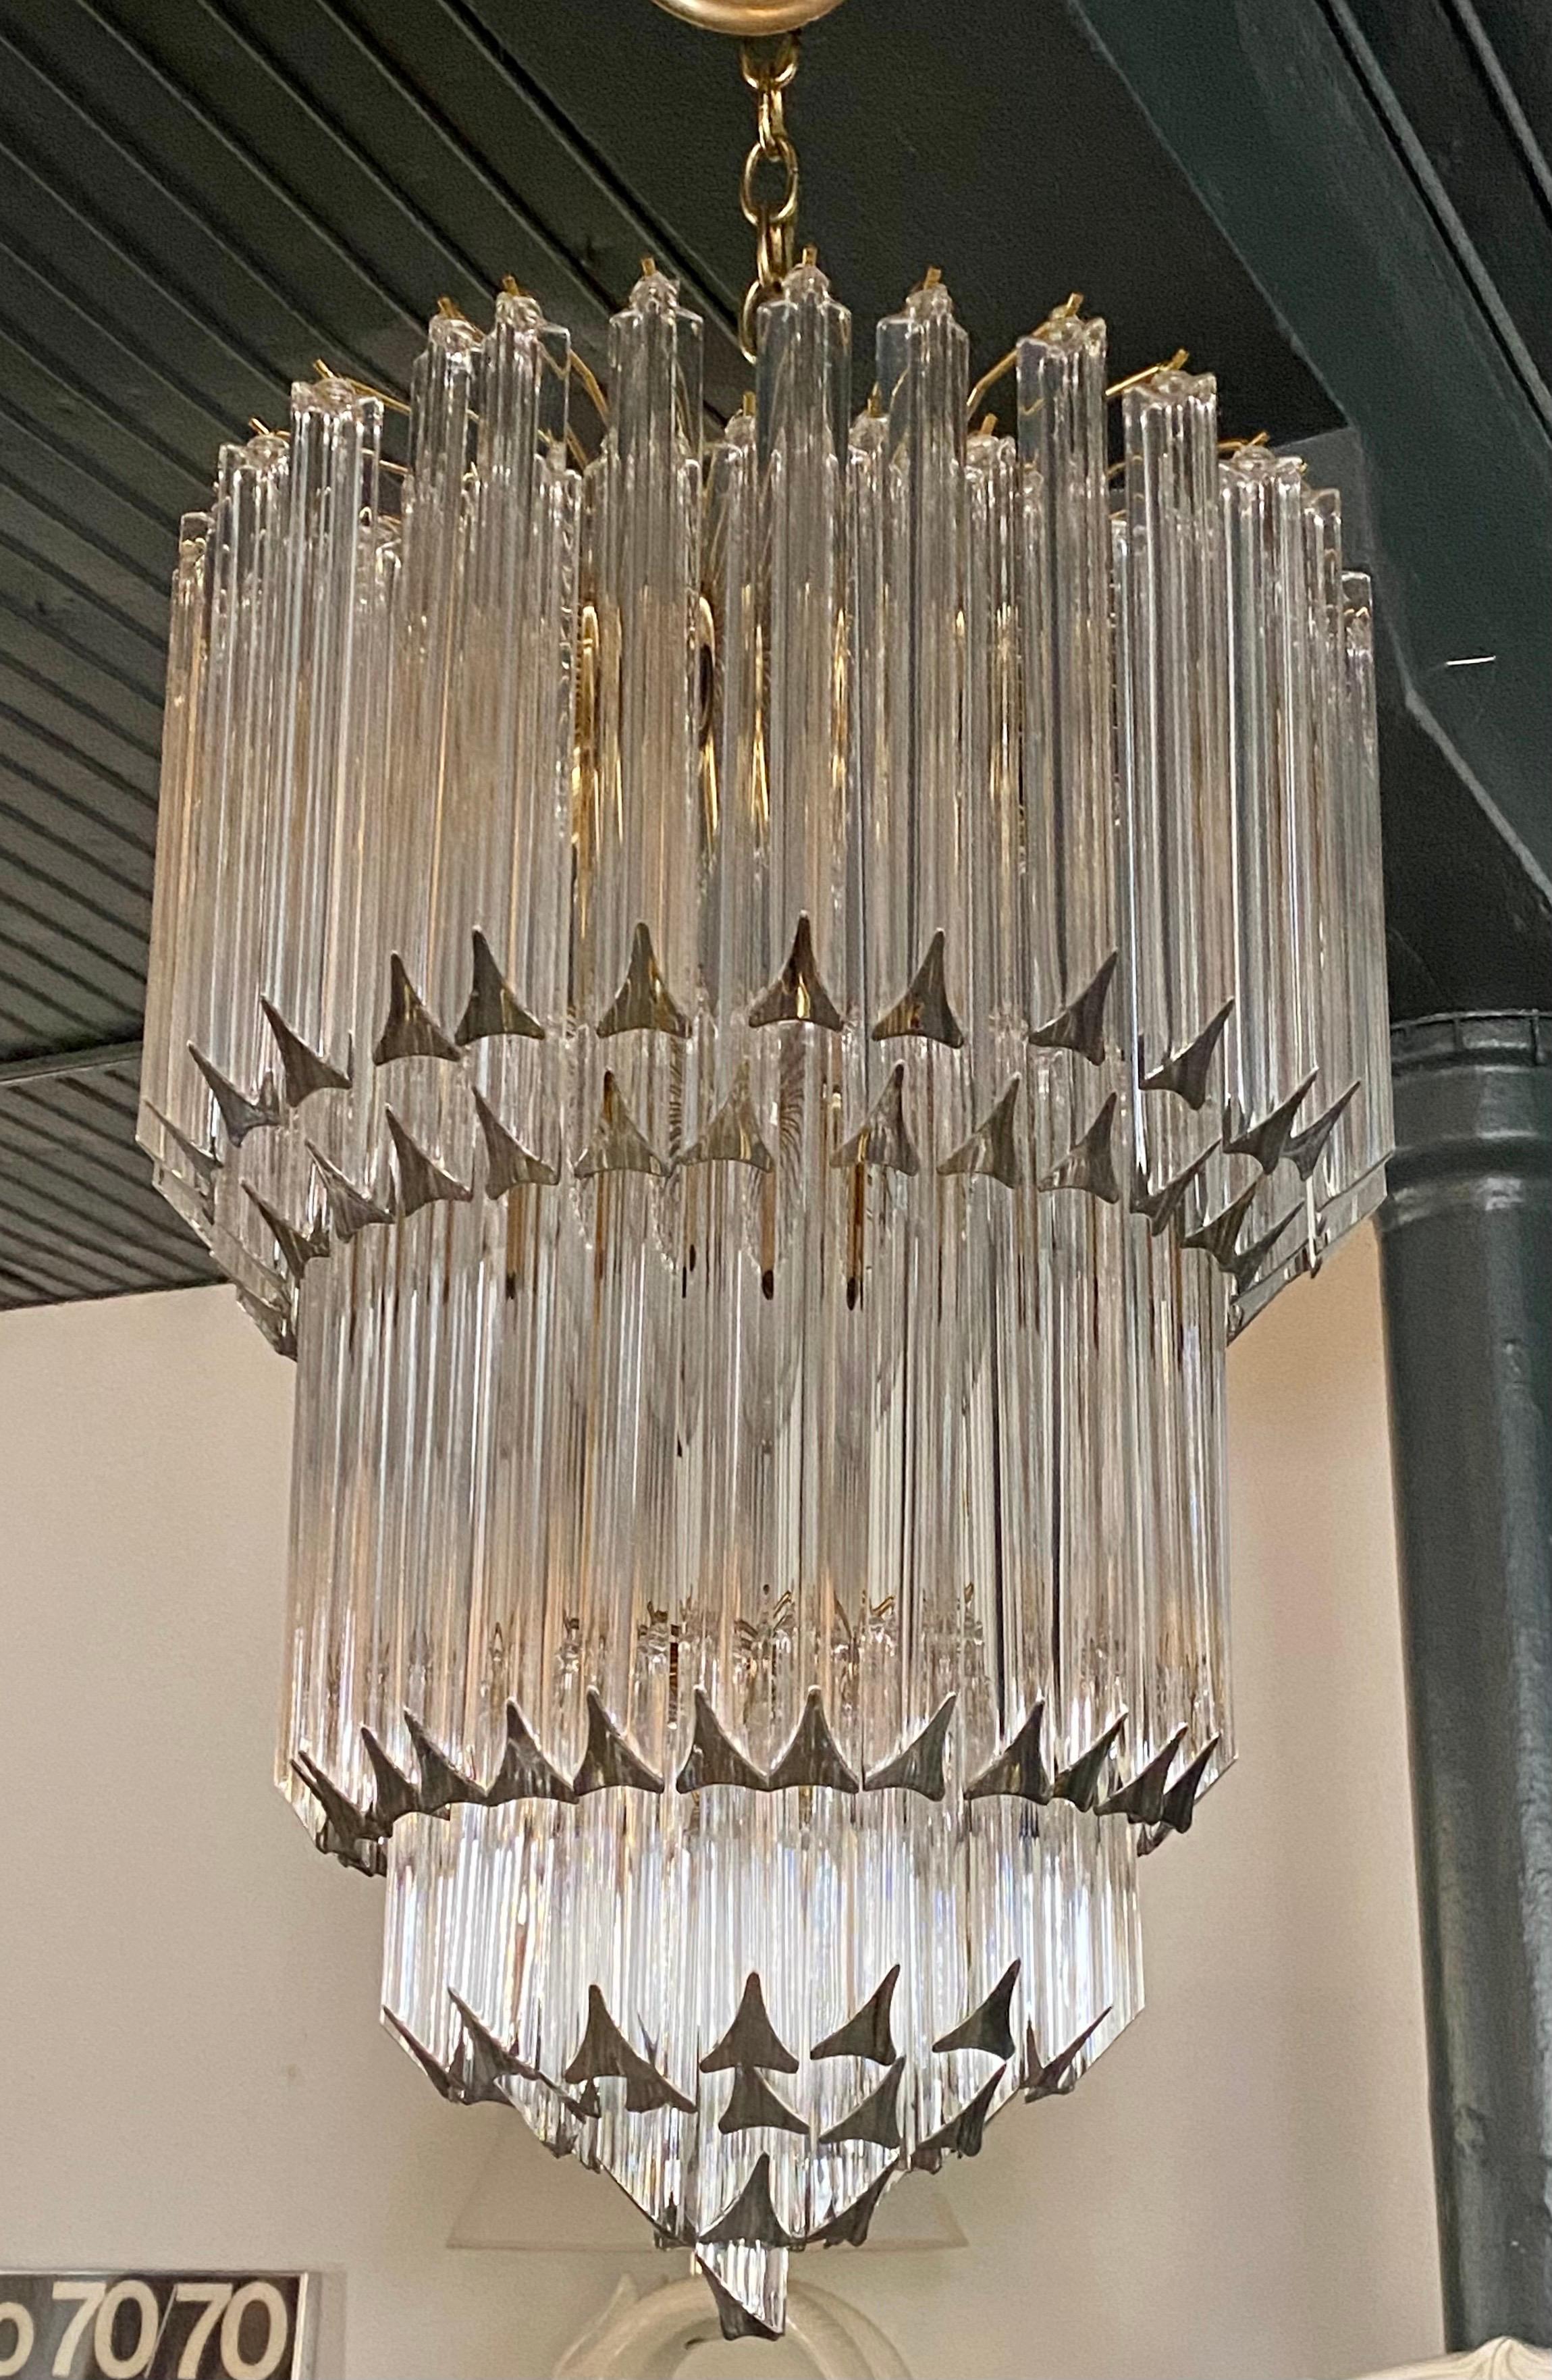 Large and Grand round Mid-Century Modern glass and brass seven-tier waterfall chandelier in the style of Venini Camer, Italy.
This impressive sculptural wedding cake chandelier is constructed of 125 clear solid crystal glass prisms. Would be great